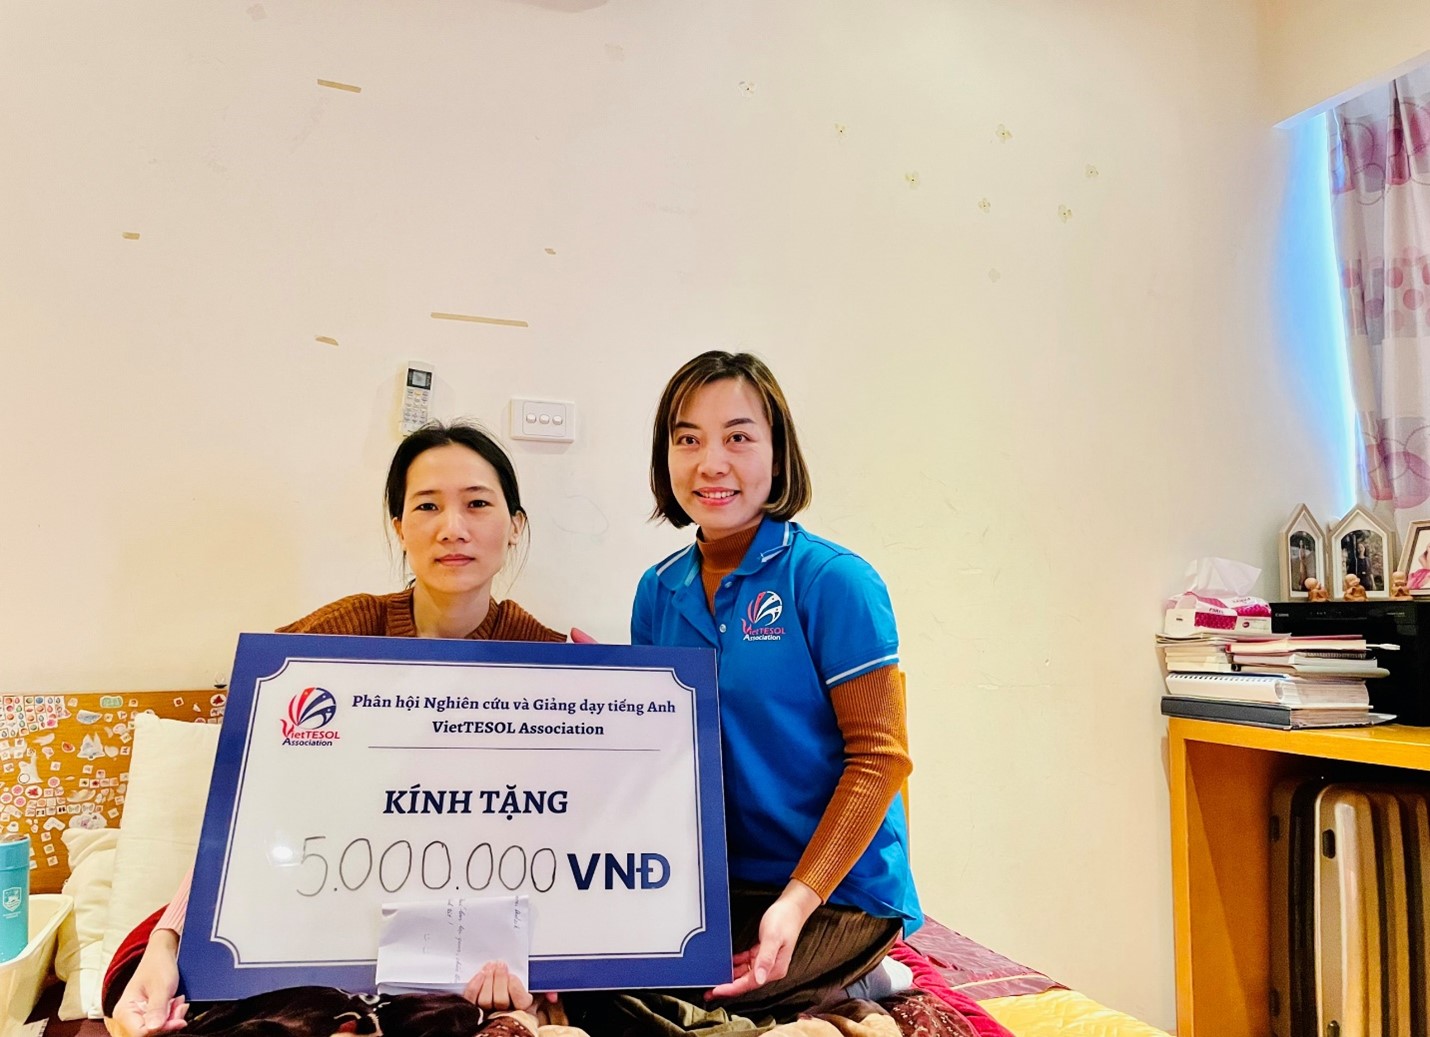 VietTESOL visited and gave gifts to Ms. Nguyen Thi Van, a breast cancer patient